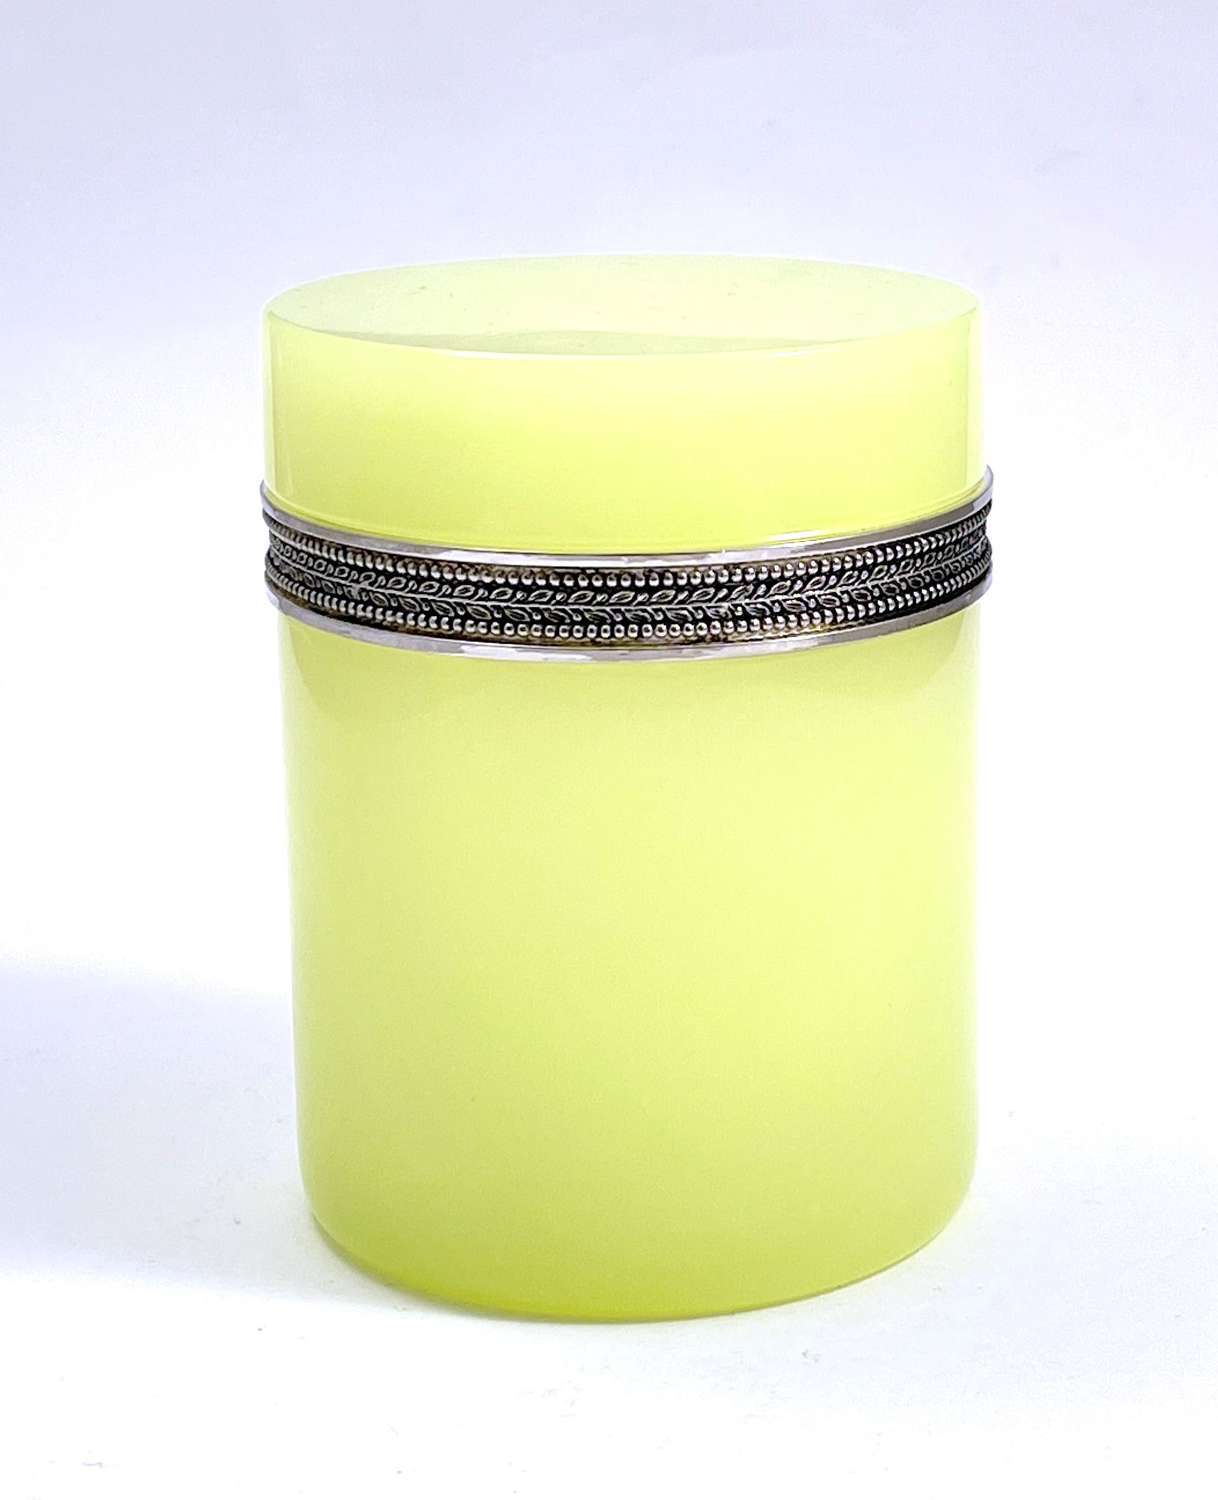 Antique Lemon Yellow Opaline Glass Cylindrical Box and Cover